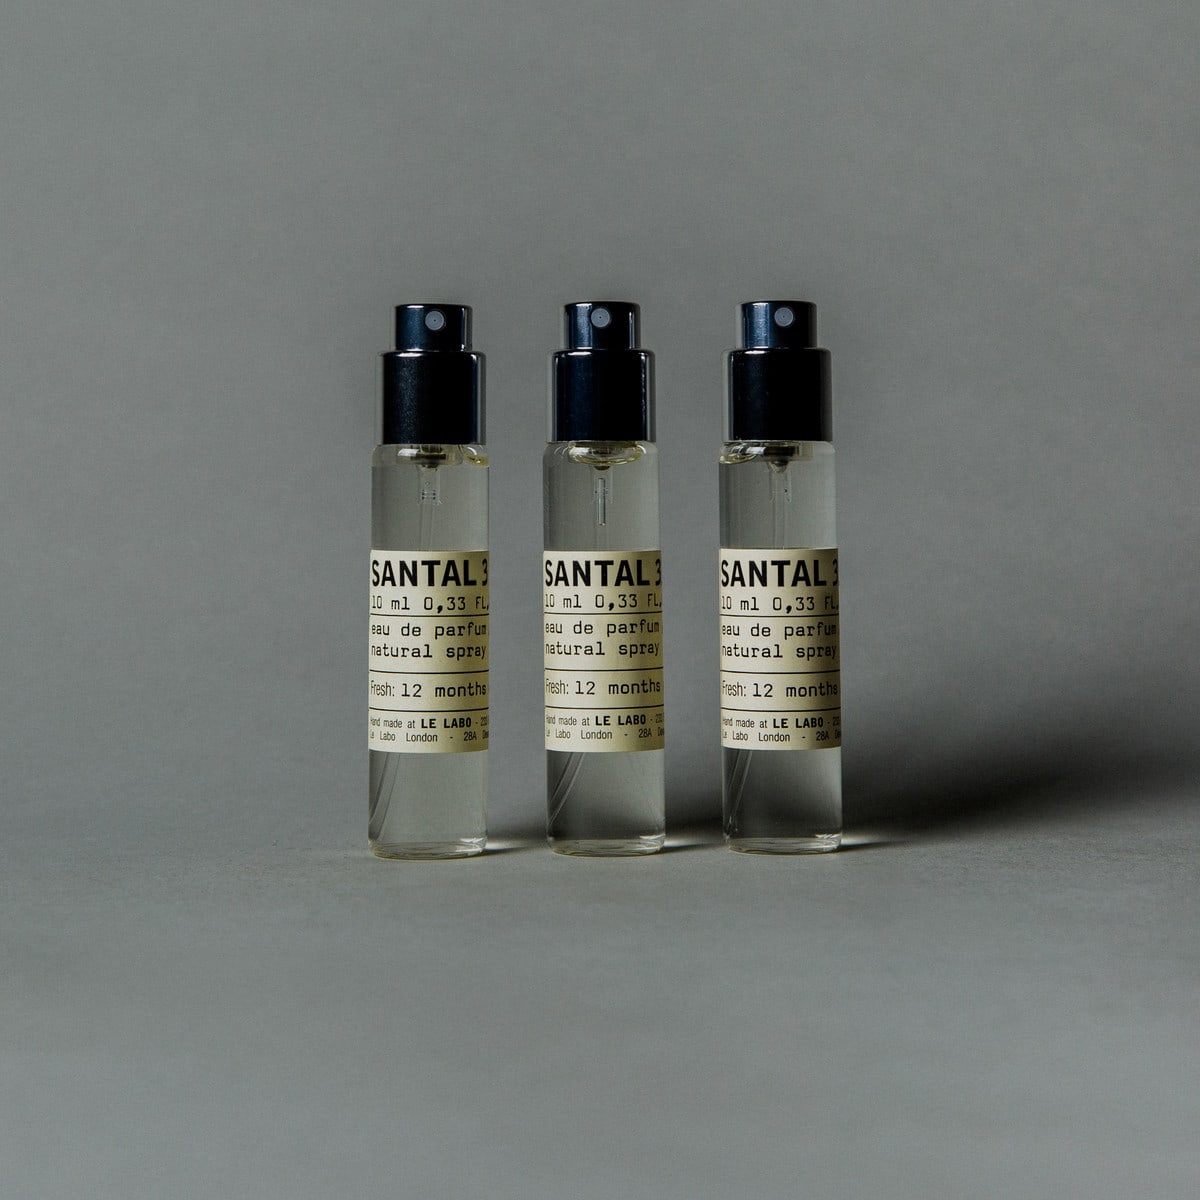 Le Labo Santal 33: The Scent That Went From Ruggedly Cool to